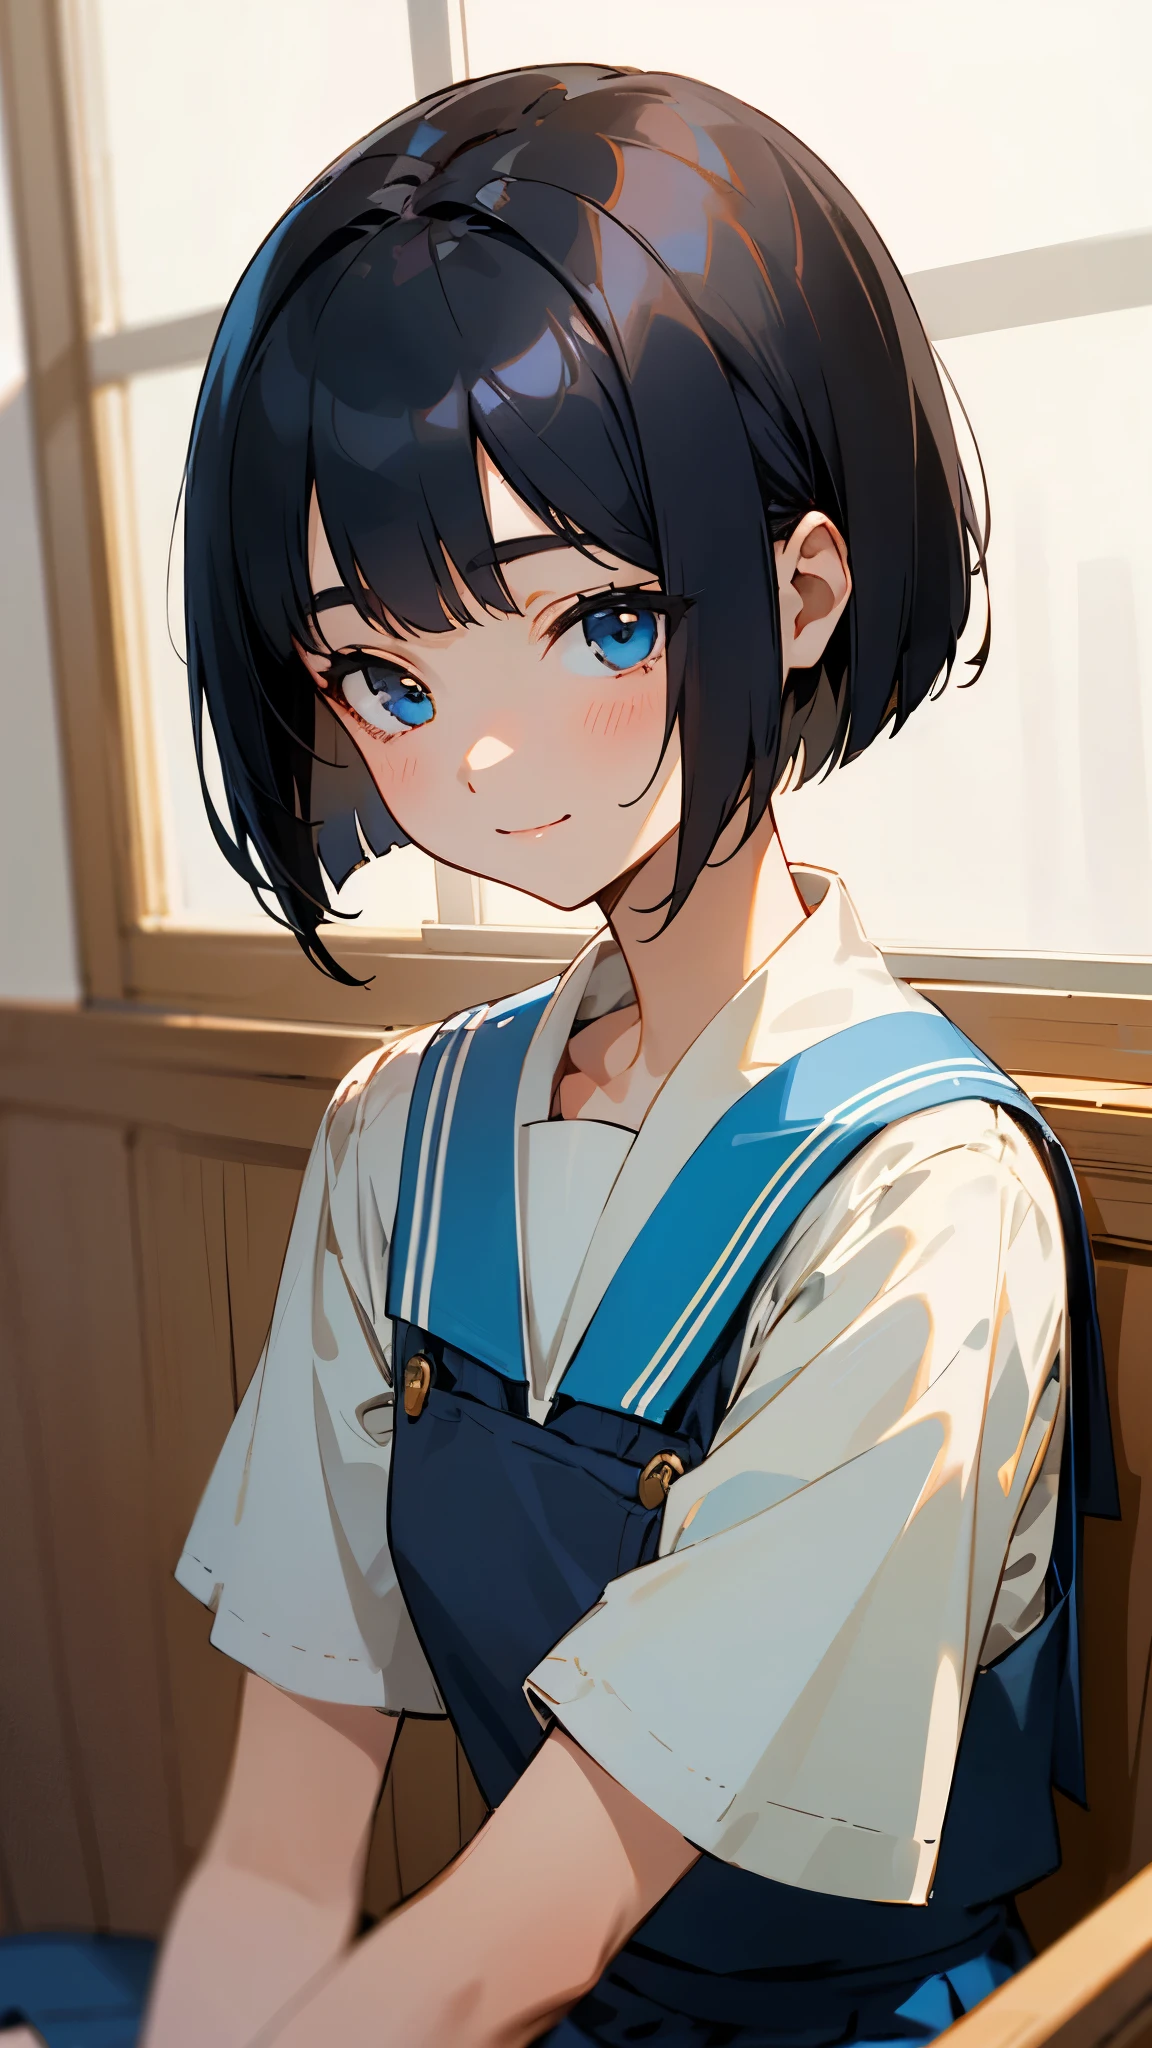 1 Girl、Shiny black hair、Short bob cut、gentle and calm expression、Delicate portrait、Student uniform、Sitting、Upper body close-up、smile、Blue Skirt、indoor